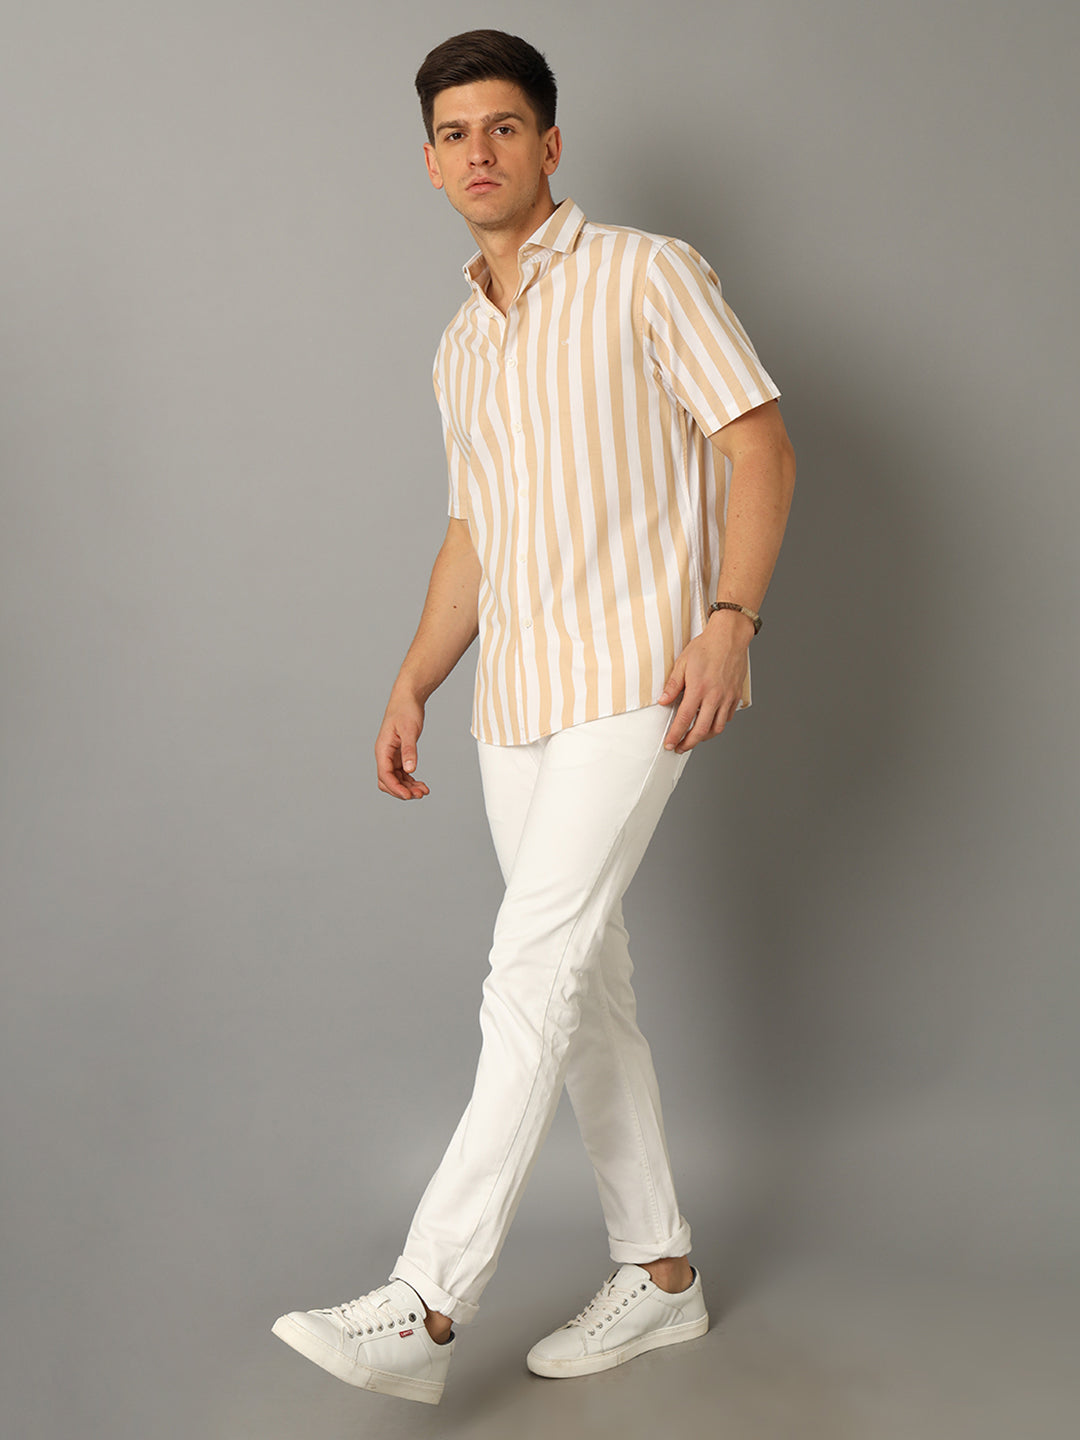 Beige Shirt, Formal Shirt Ideas With White Jeans, Casual Pant Shirt  Combination | Dress code, dress shirt, vision care, casual wear, flash  photography